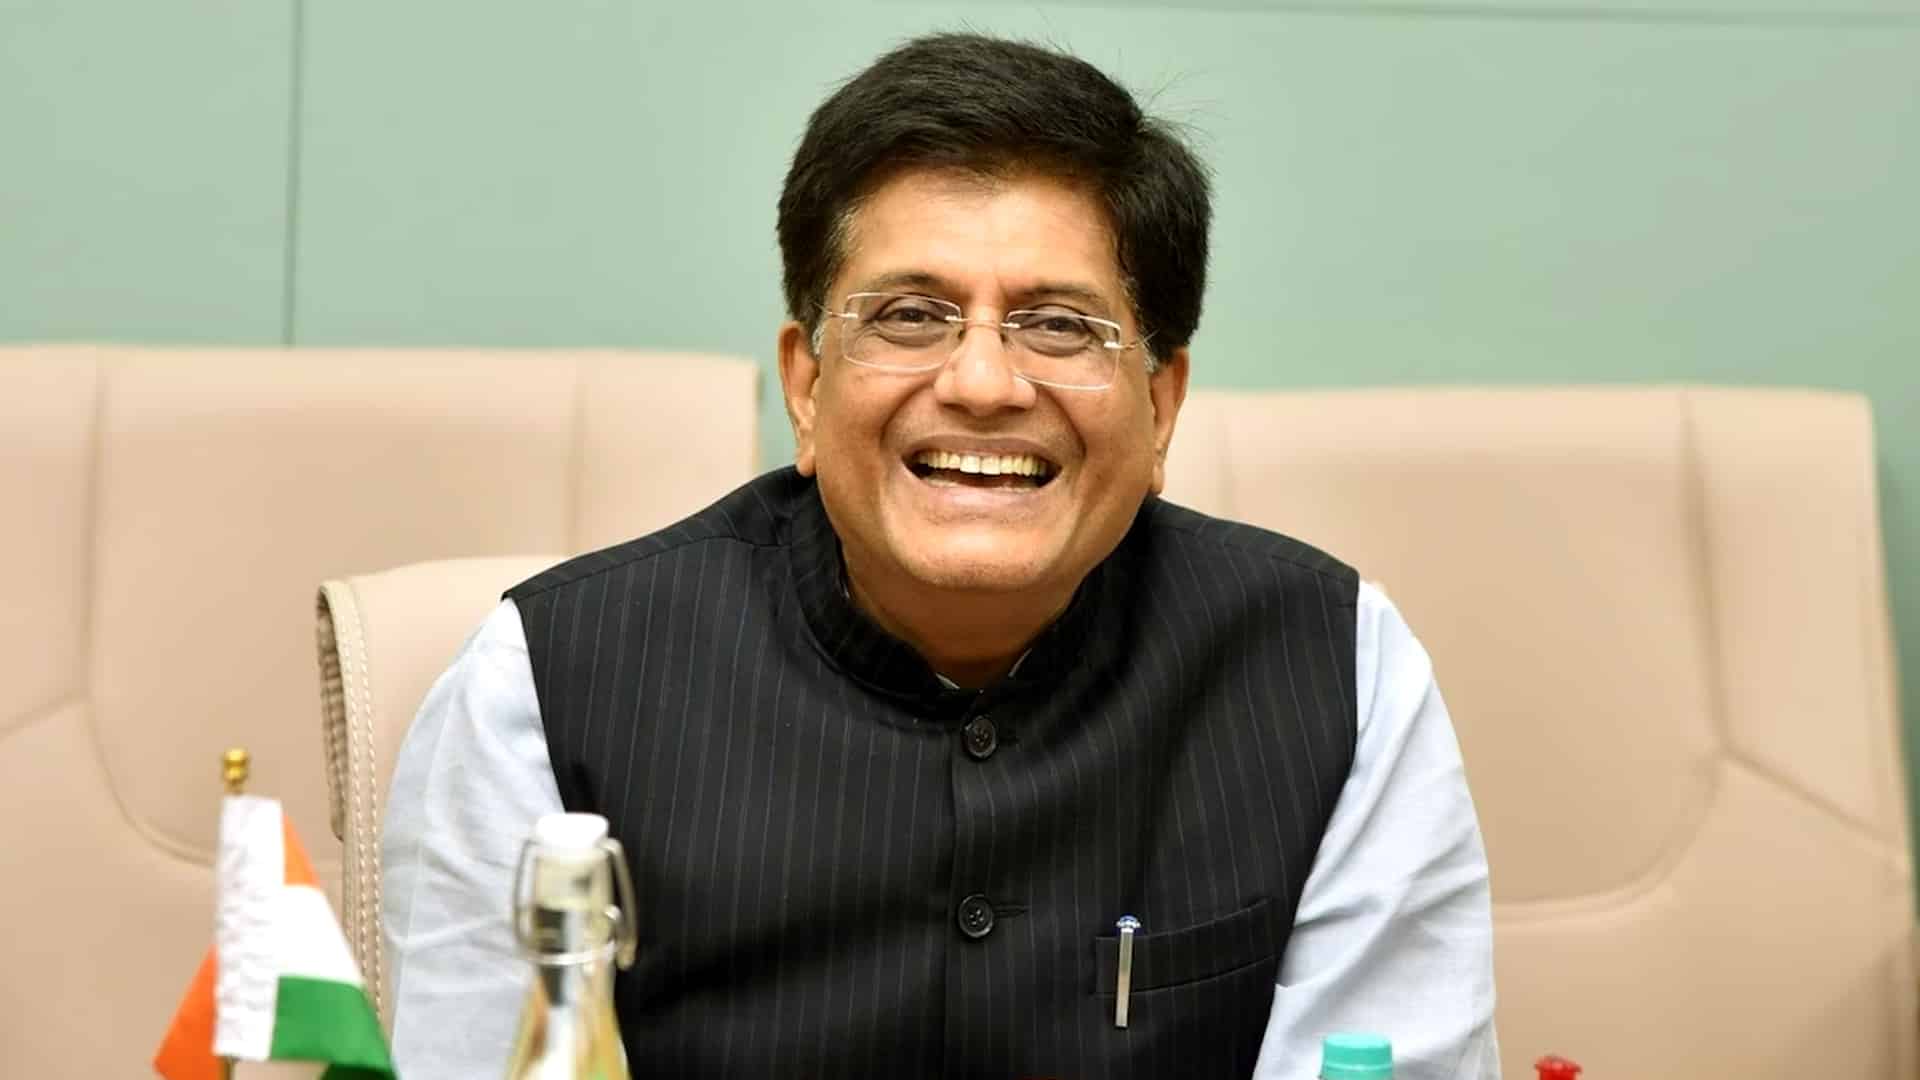 We are working with UK on IP rights, modernisation: Piyush Goyal